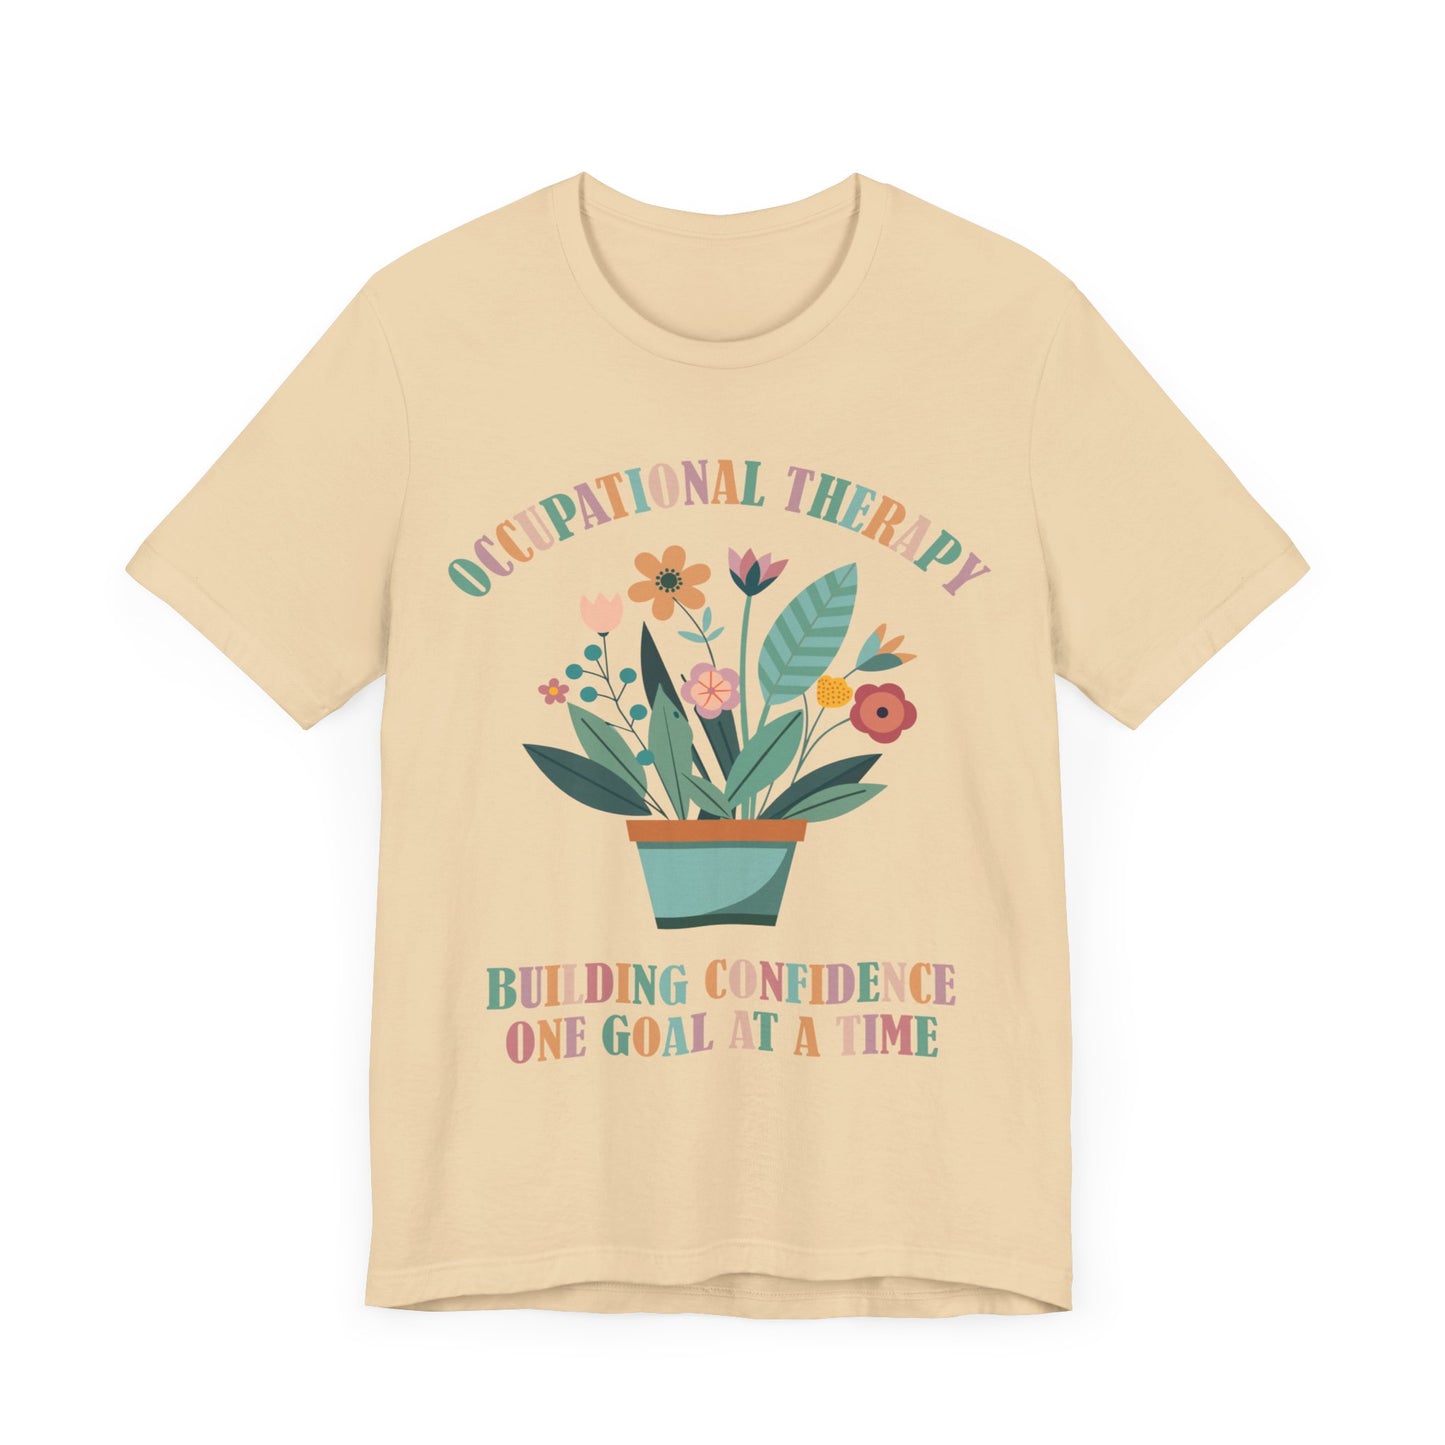 Occupational Therapy Building Confidence One Goal At A Time Shirt